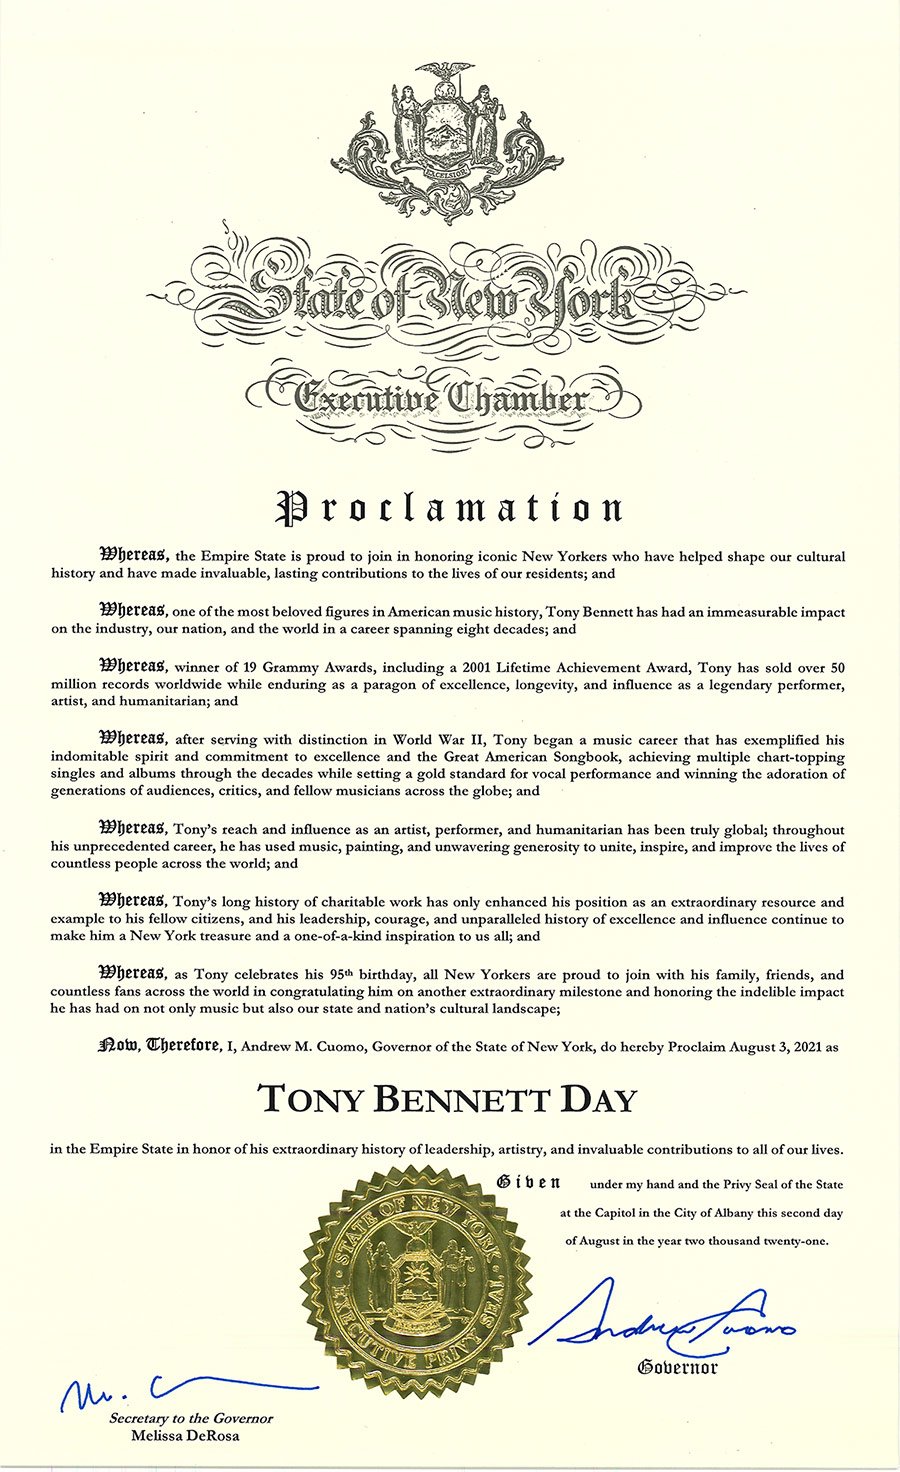 Tony Bennett Celebrates 95th Birthday With Final NYC Performances &#038; State Proclamation